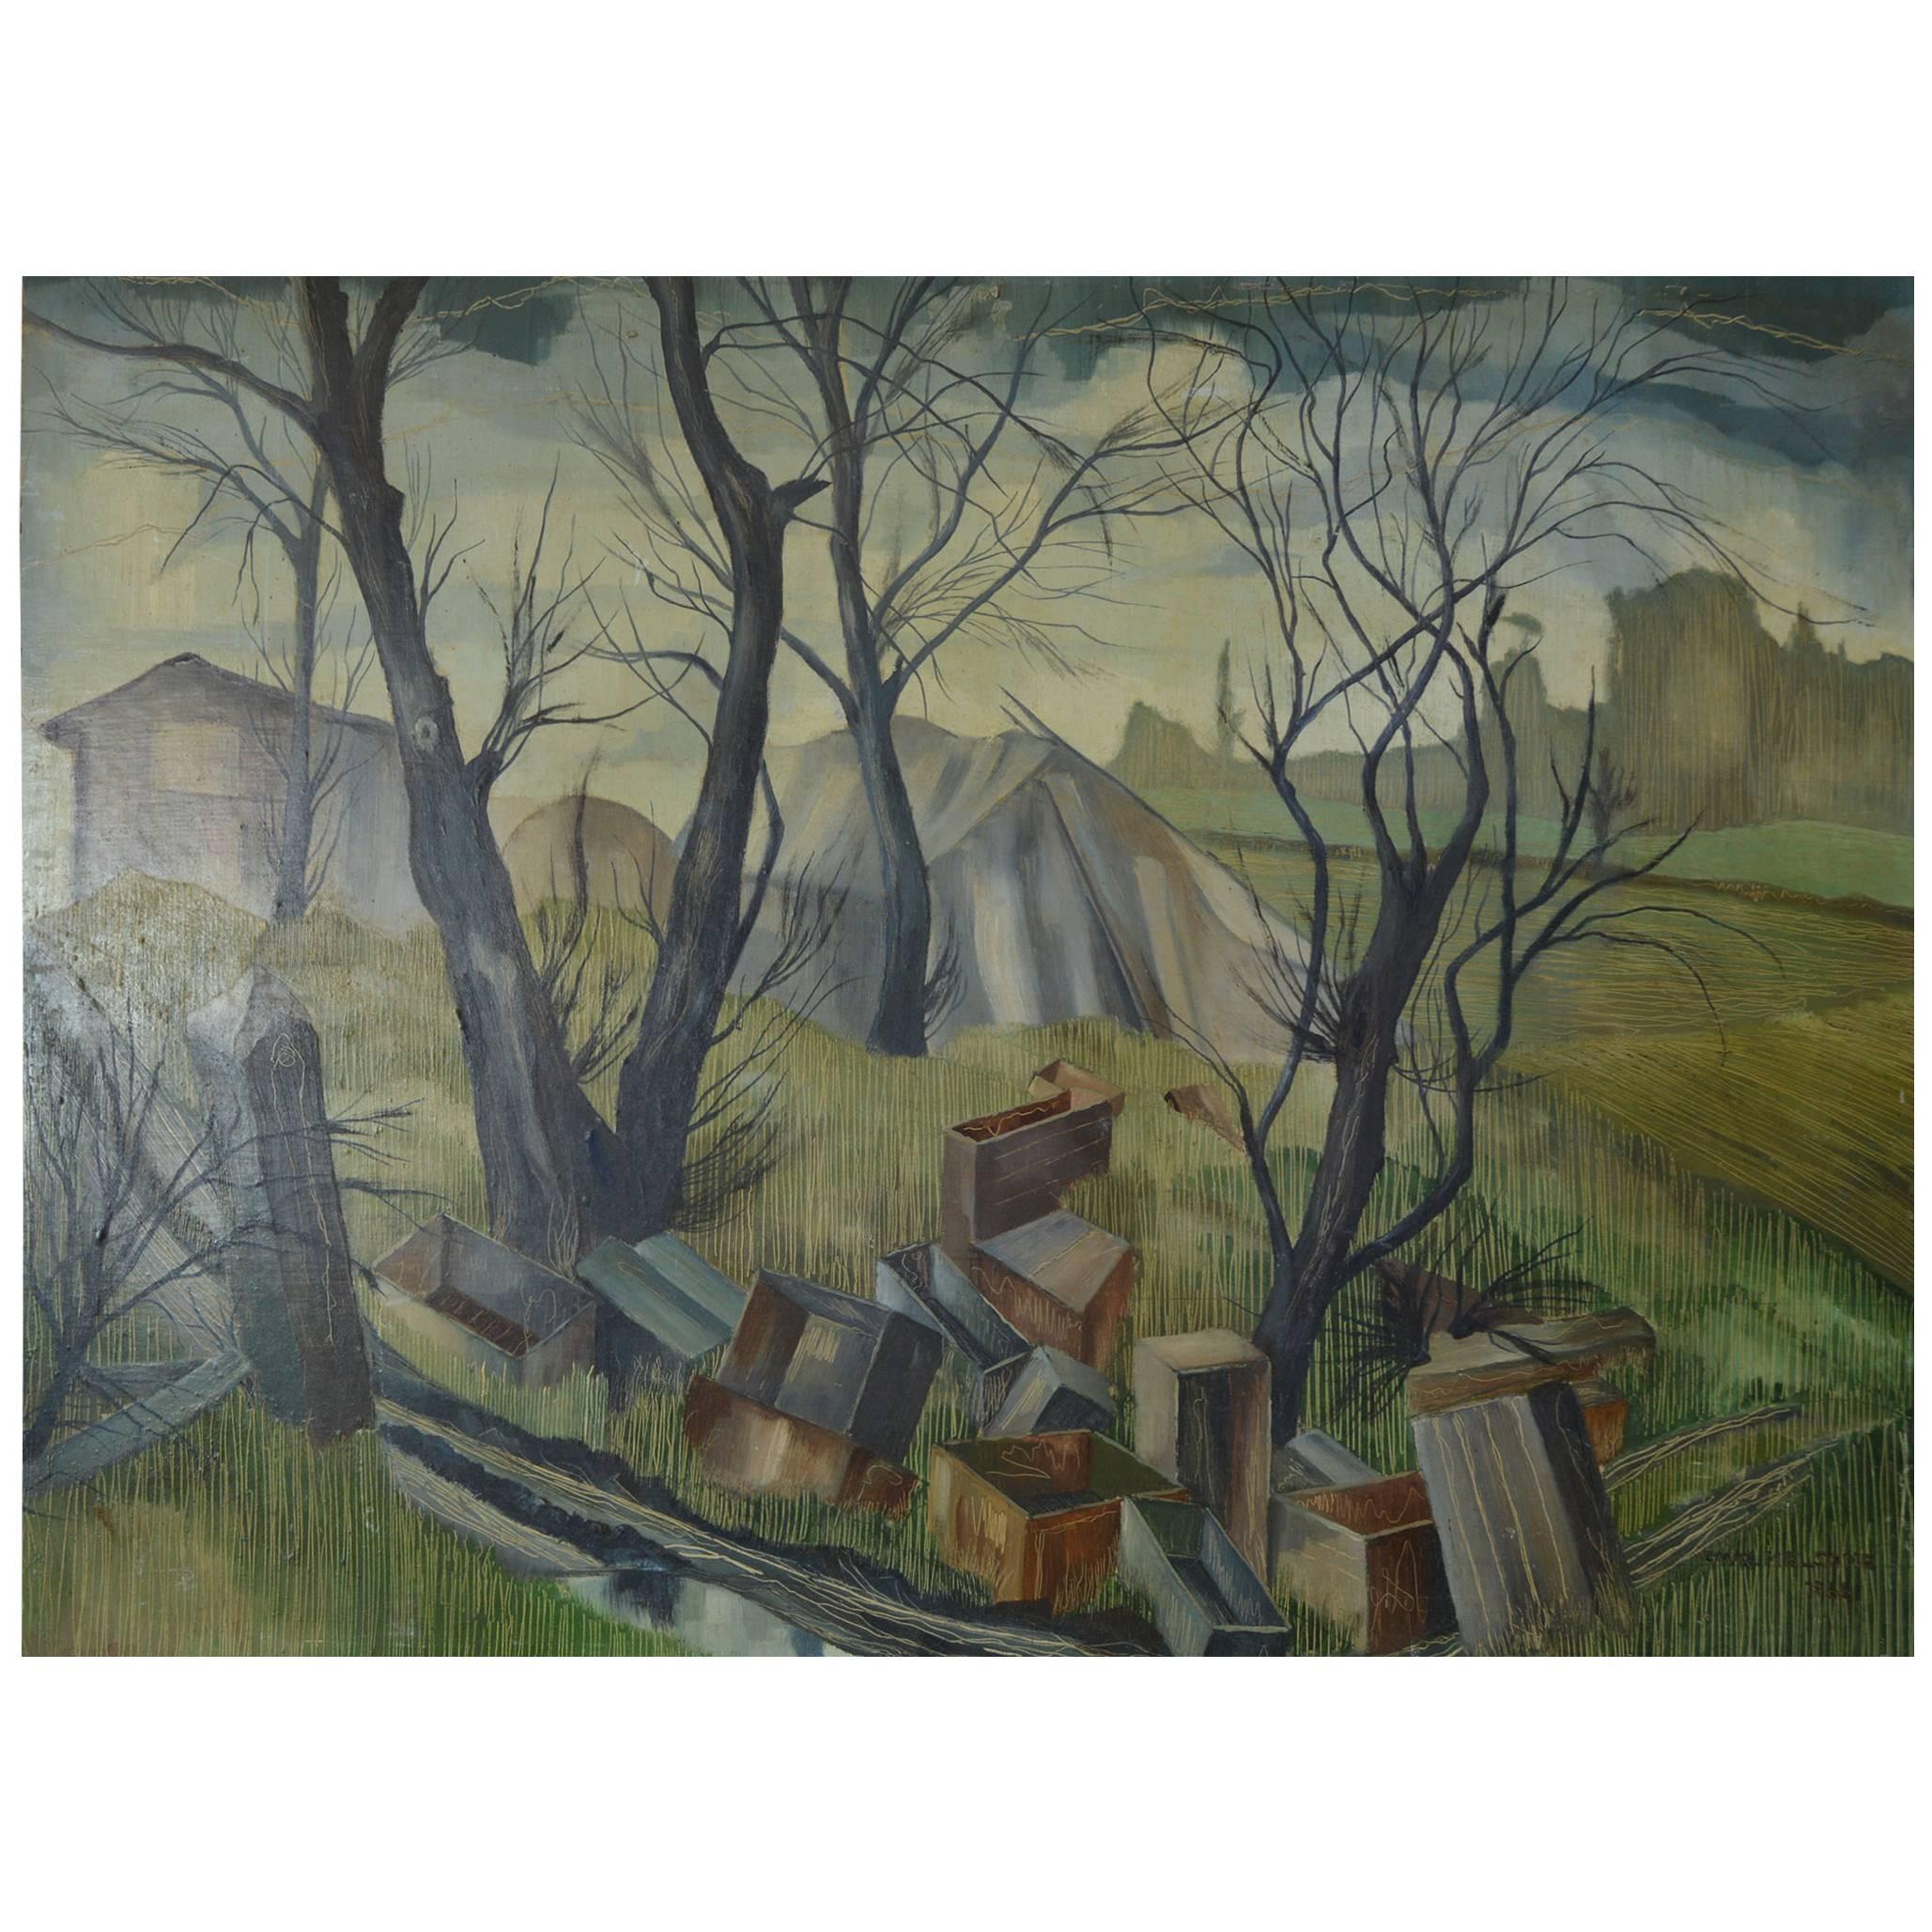 Untitled. Chaotic Landscape. Acrylic on Board R.Melsome, 1966